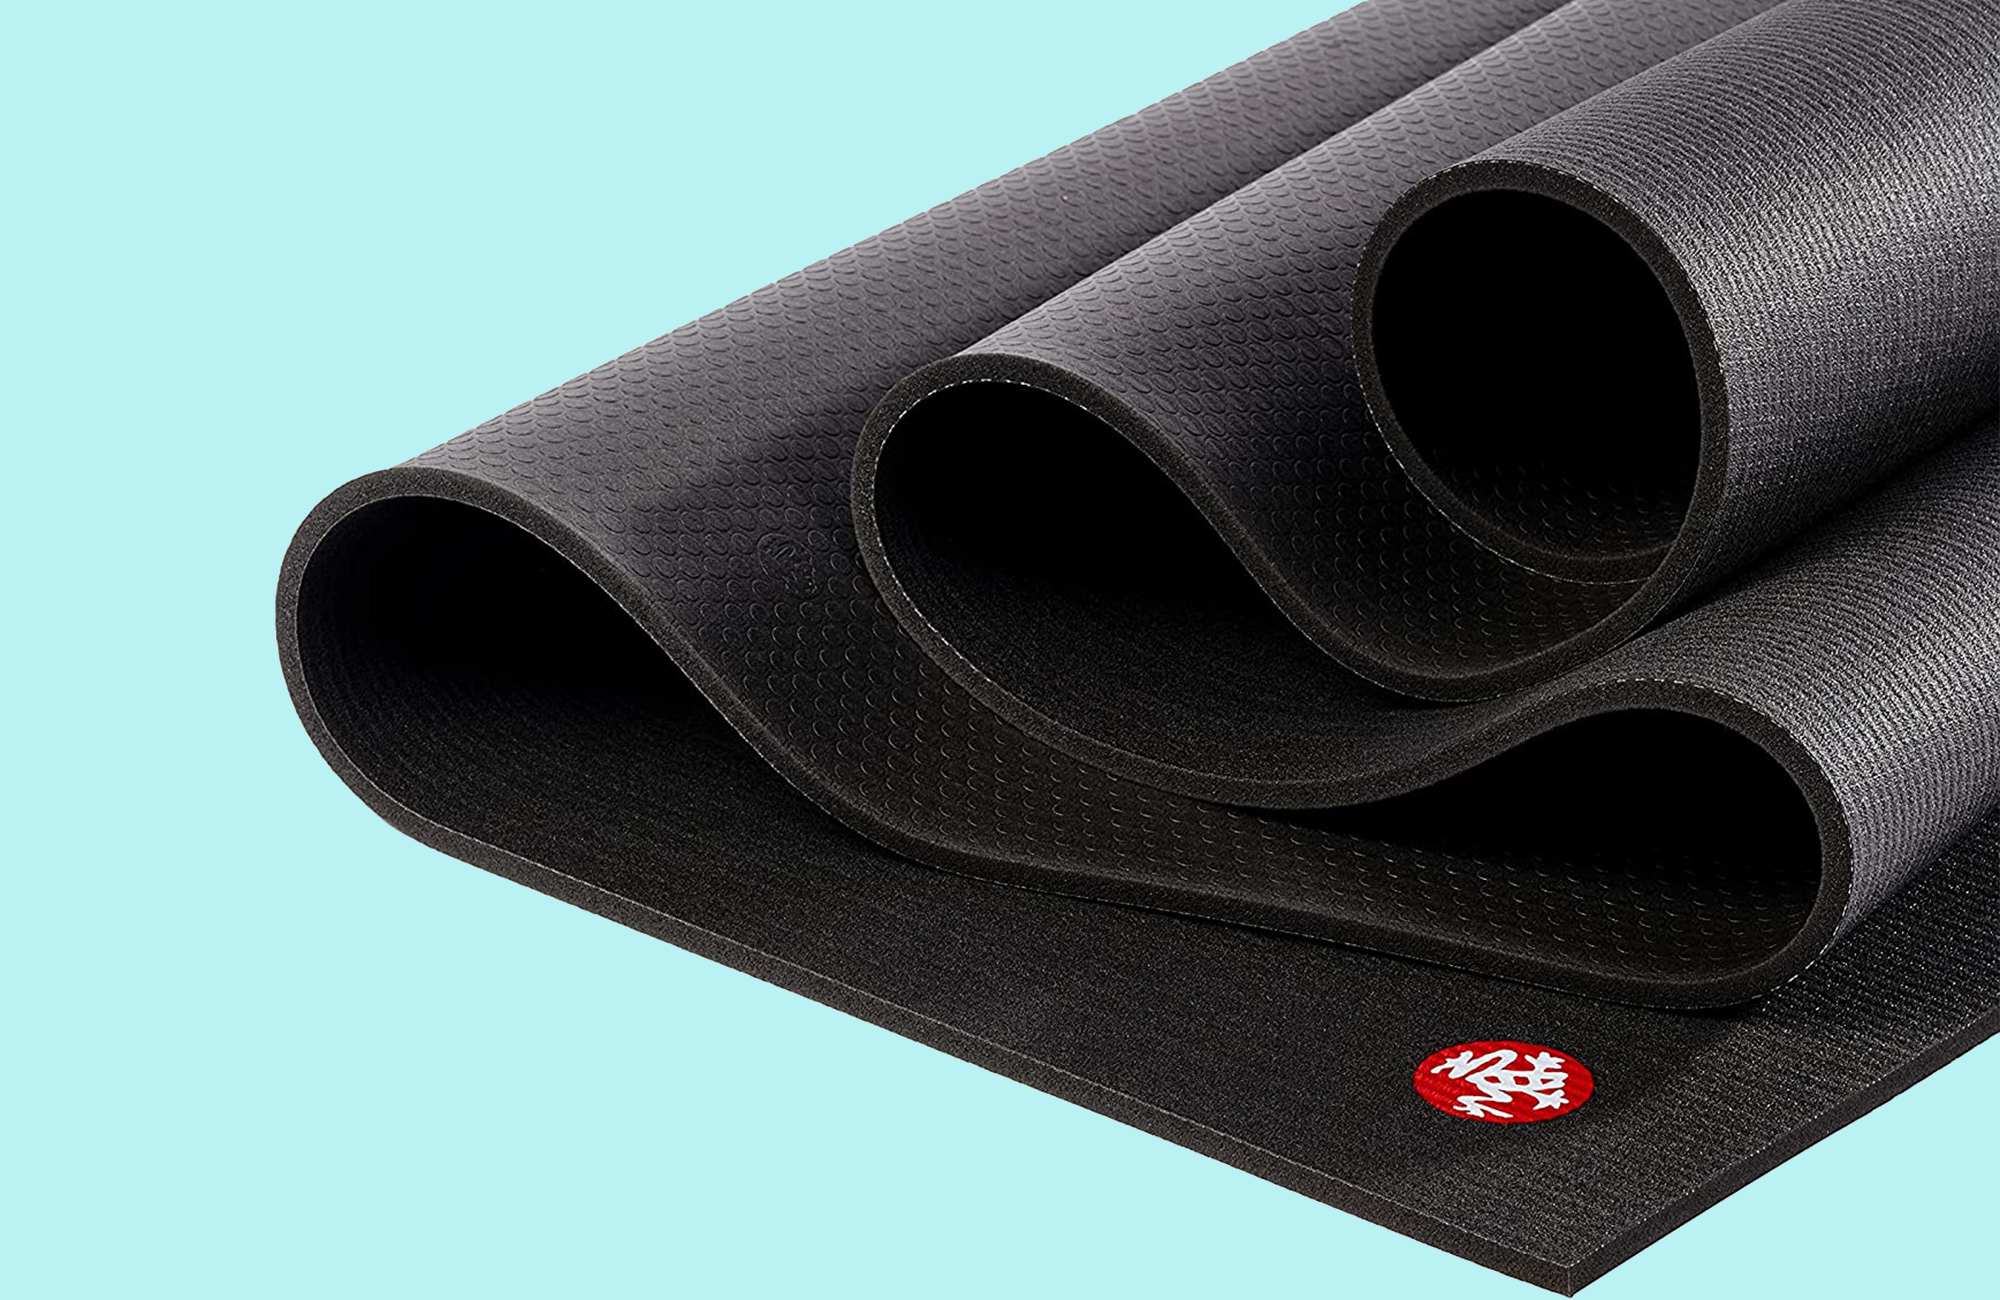 Skyin Yoga mat,Best No-Slip Hot Yoga Mat,SGS Approved No-Toxic,TPE Yoga mat,Ideas for Exercise,Yoga and Pilates